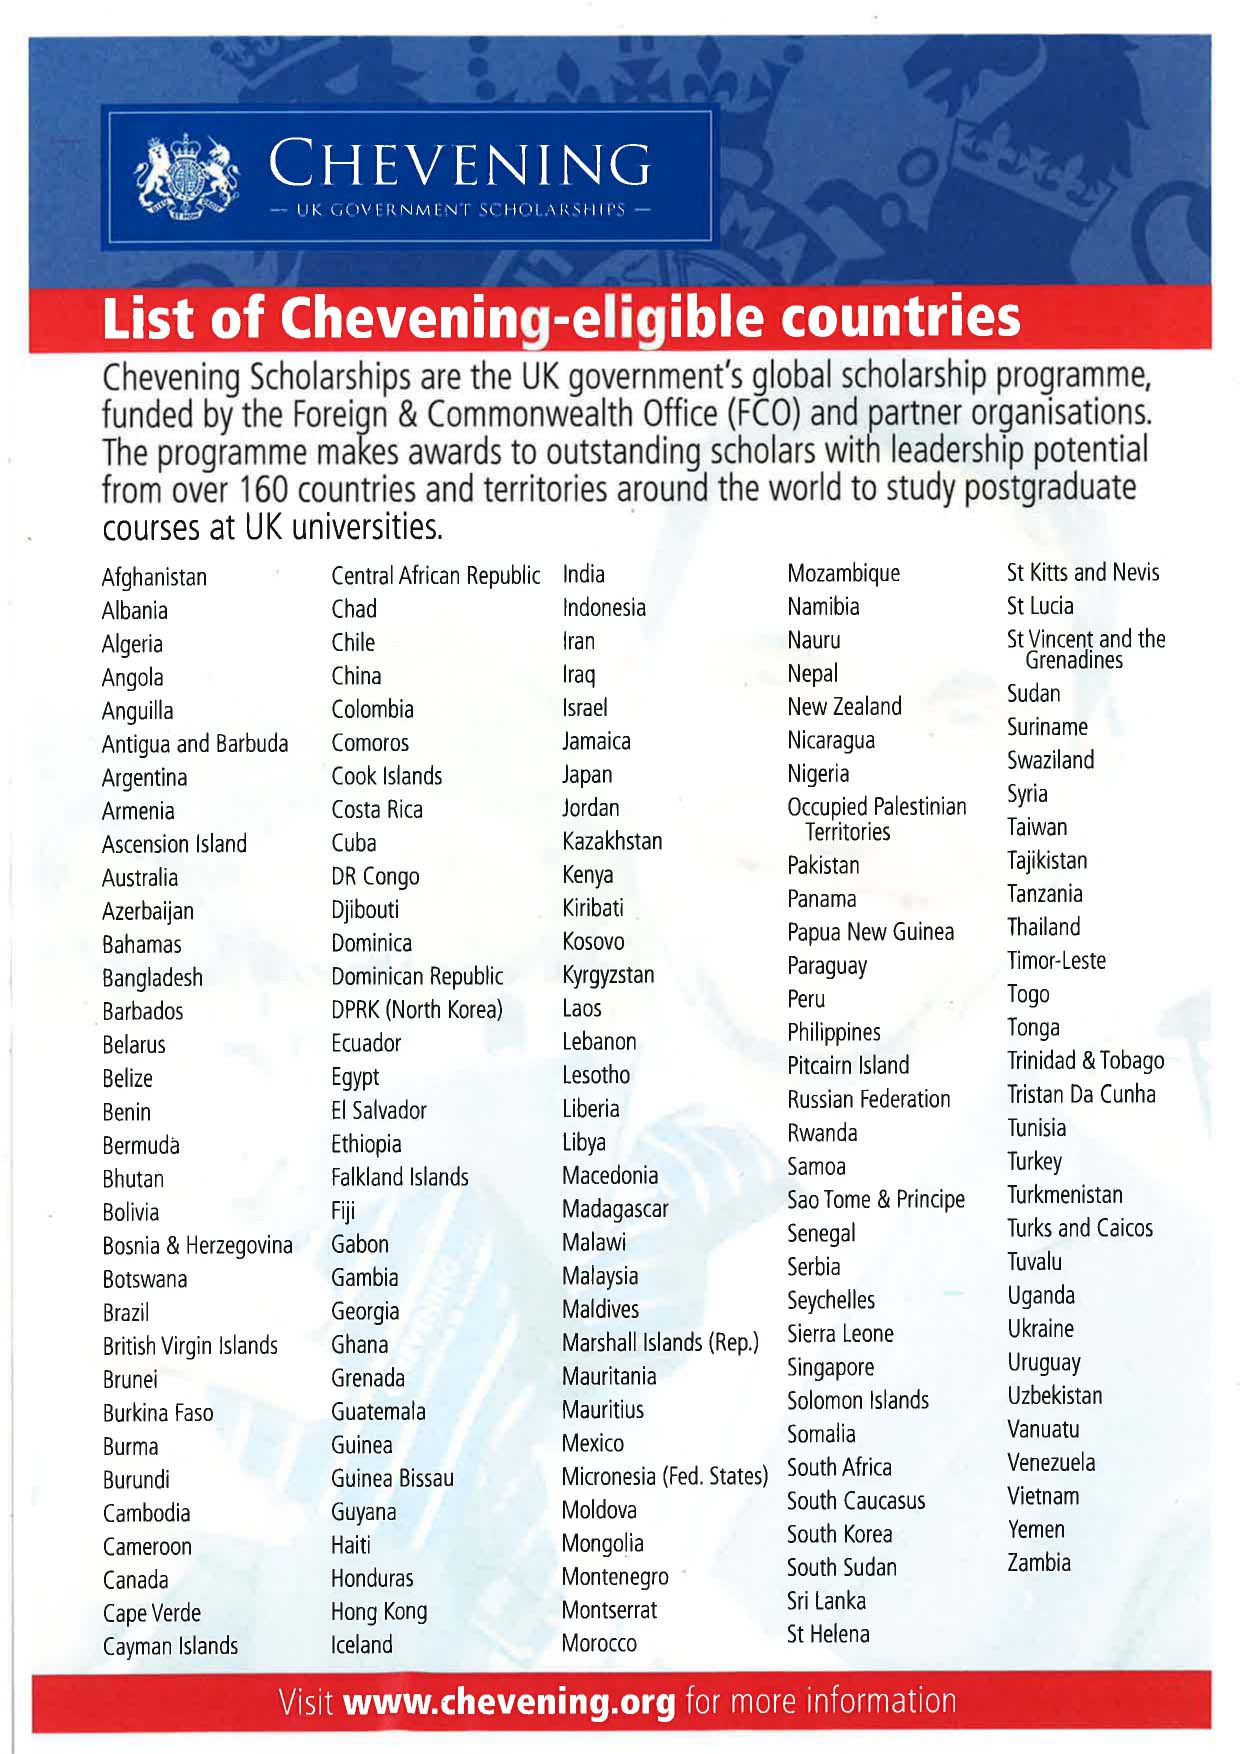 List of Chevening scholarships eligible countries